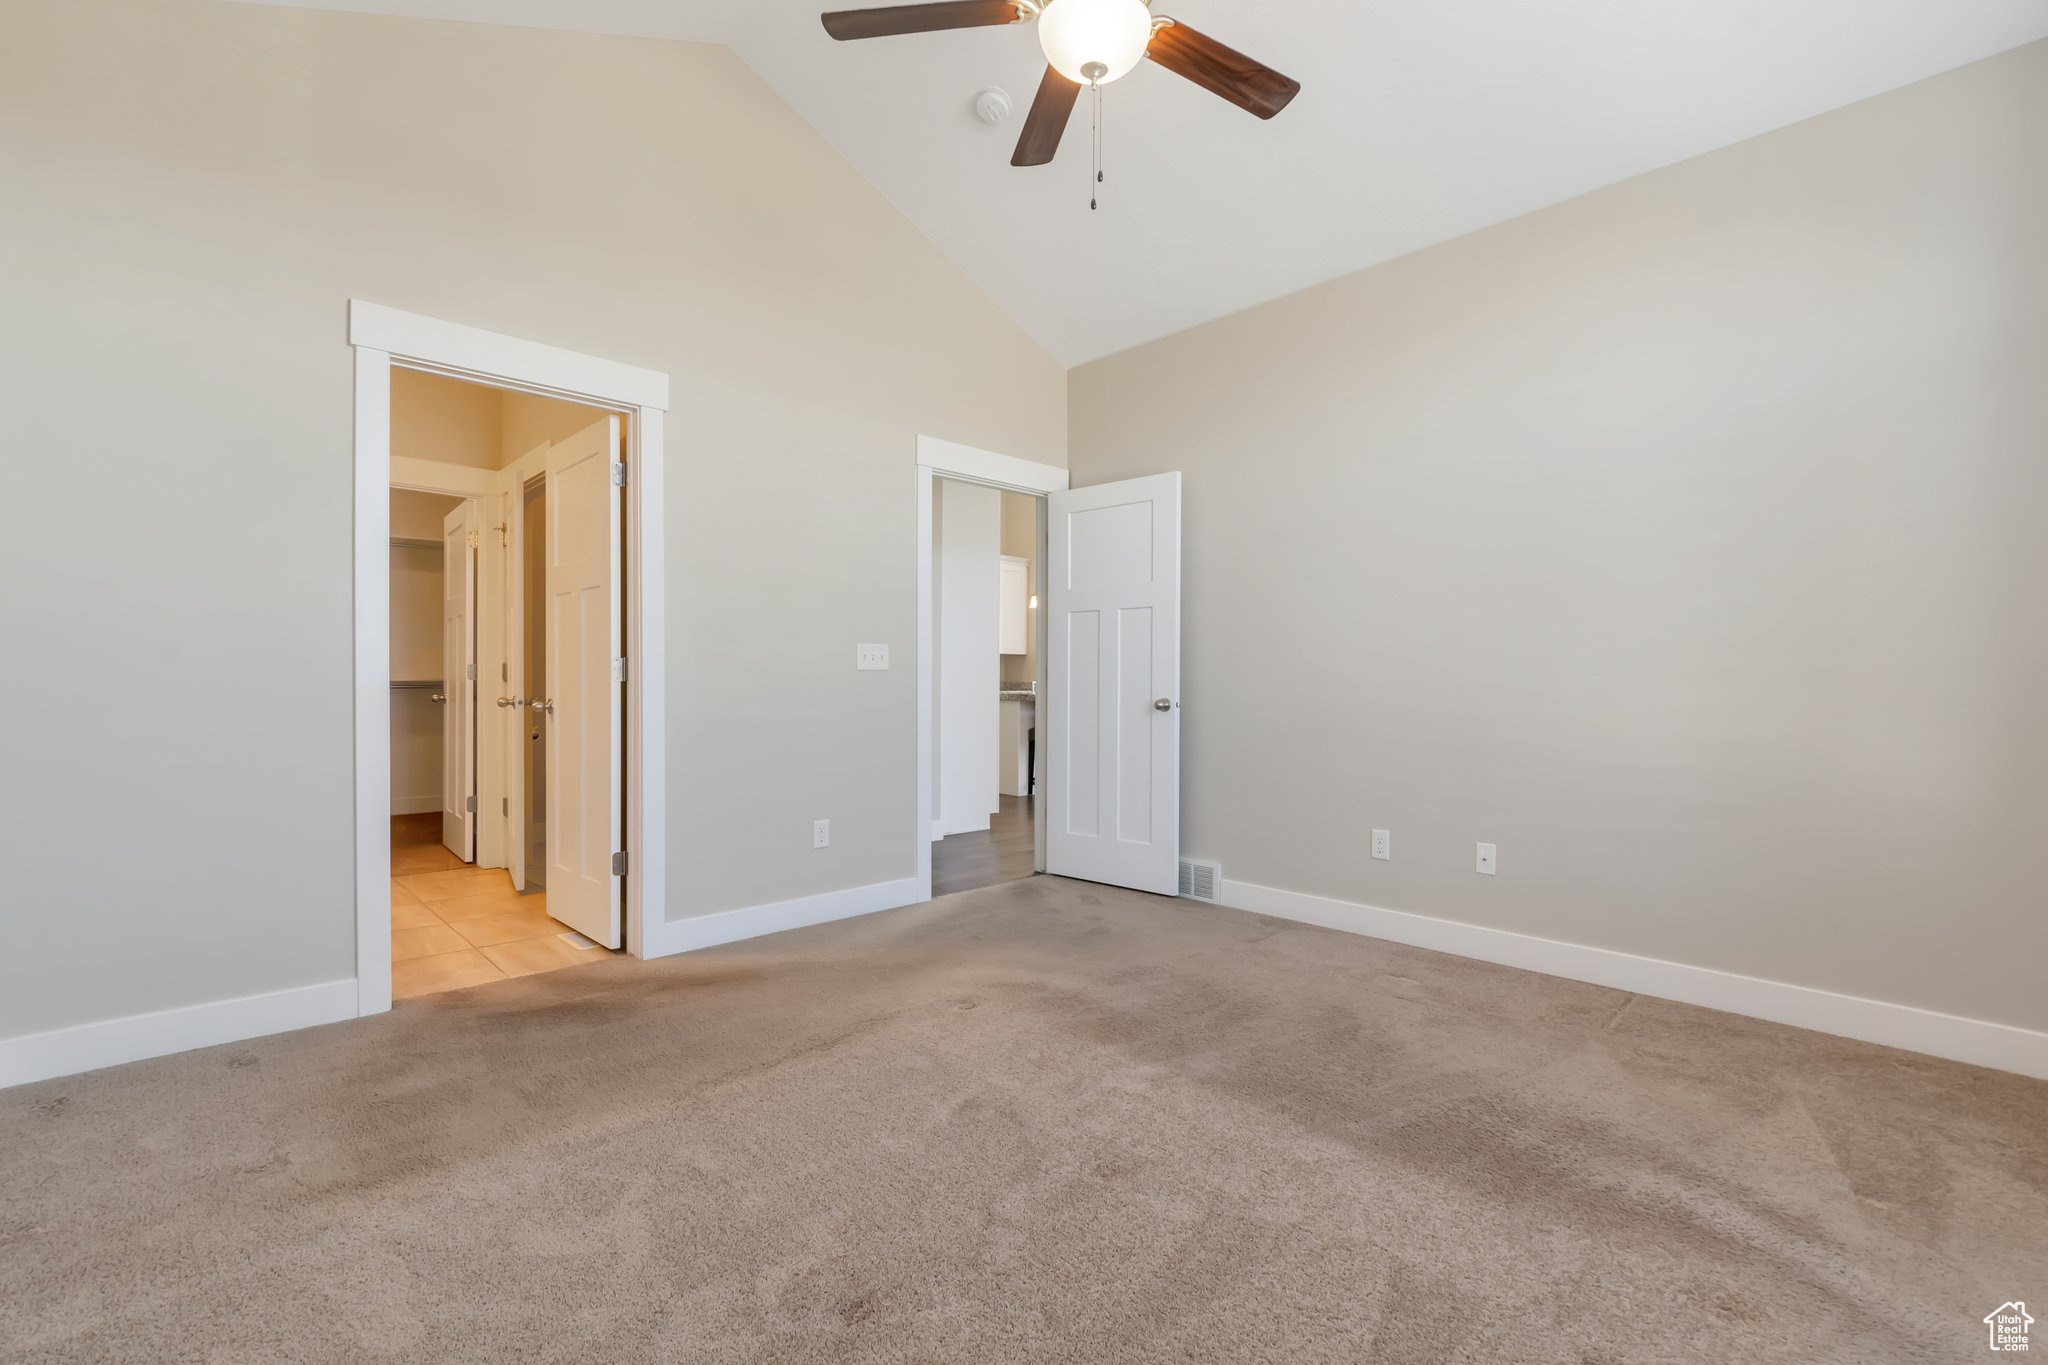 Unfurnished bedroom with high vaulted ceiling, light carpet, ceiling fan, and a walk in closet